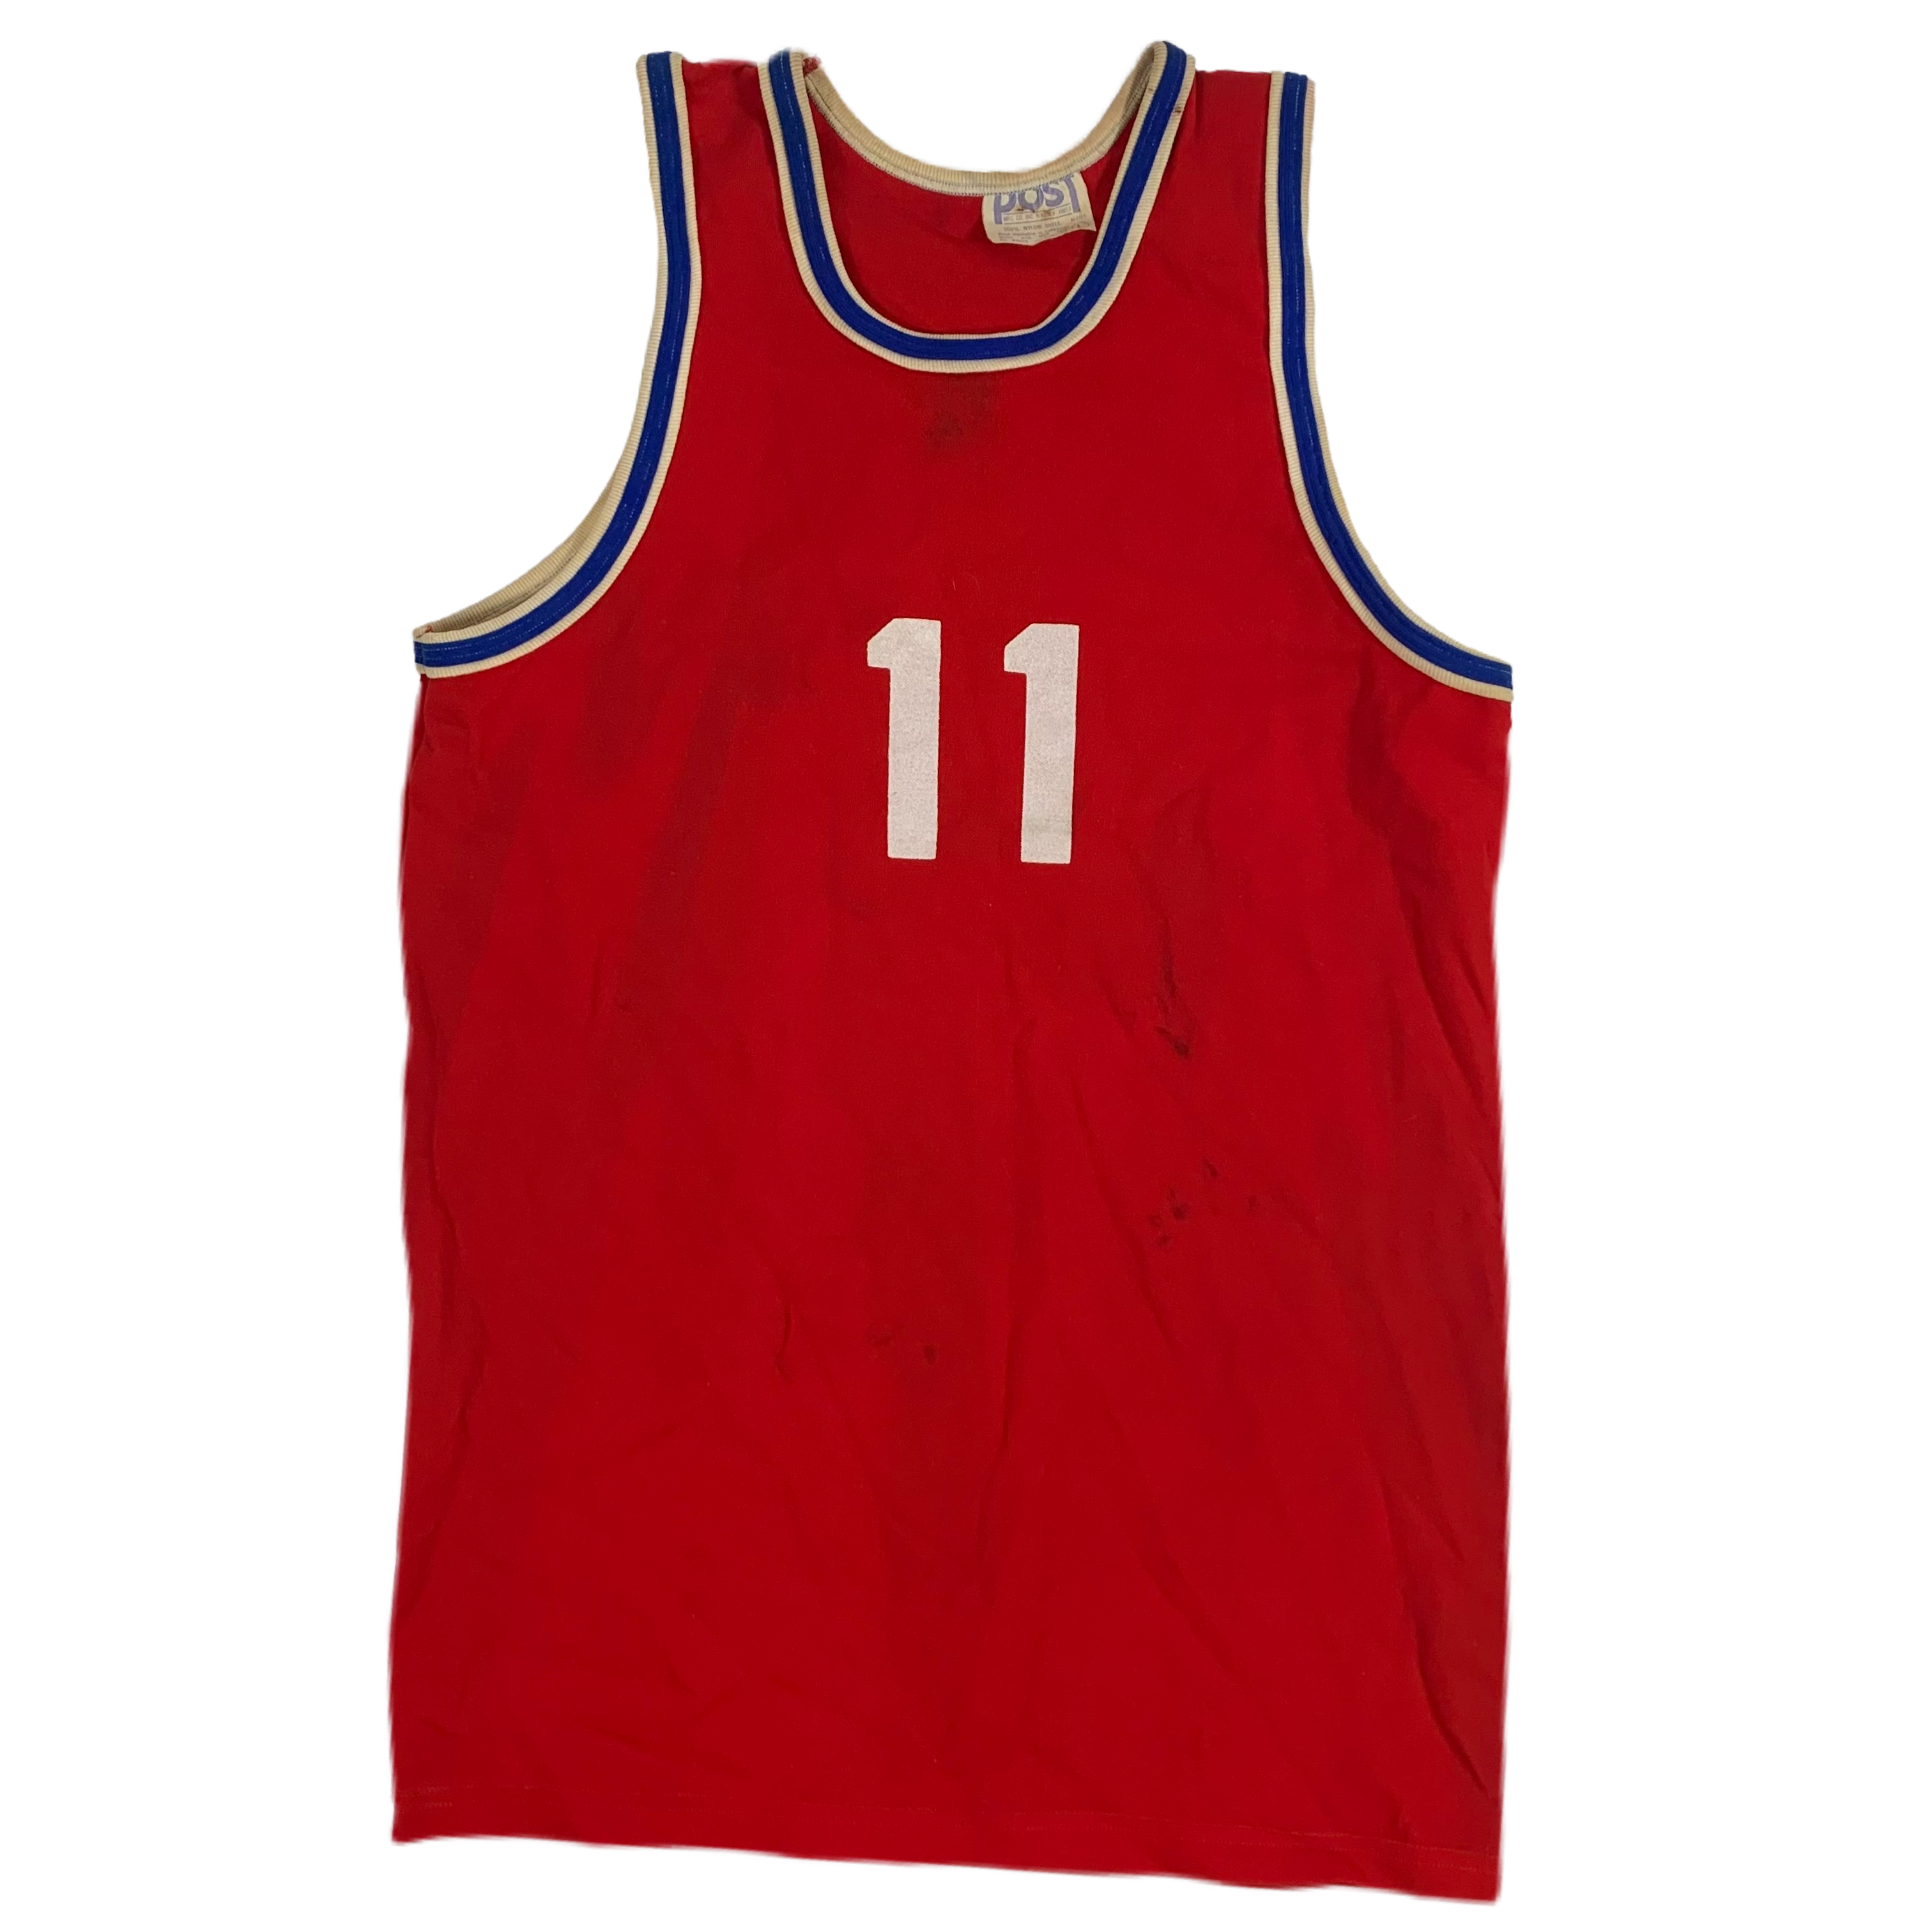 Novato High #custommade game day basketball jersey from